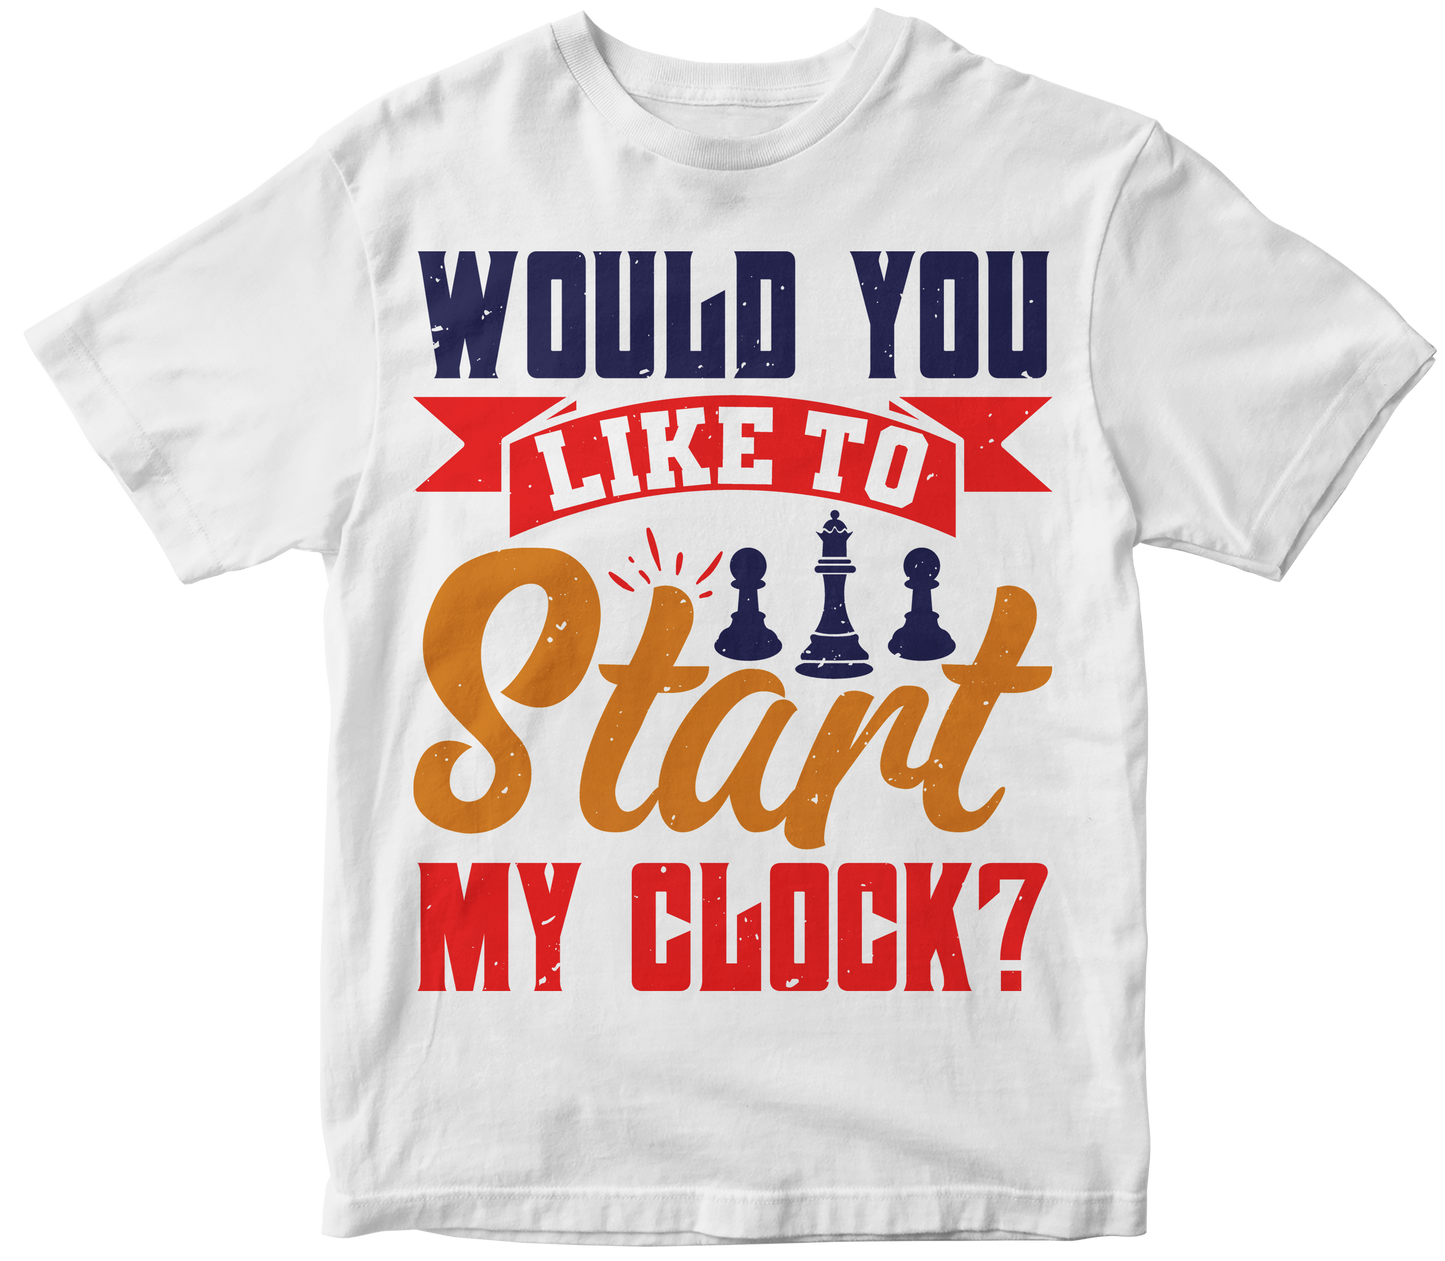 Would you like to start my clock